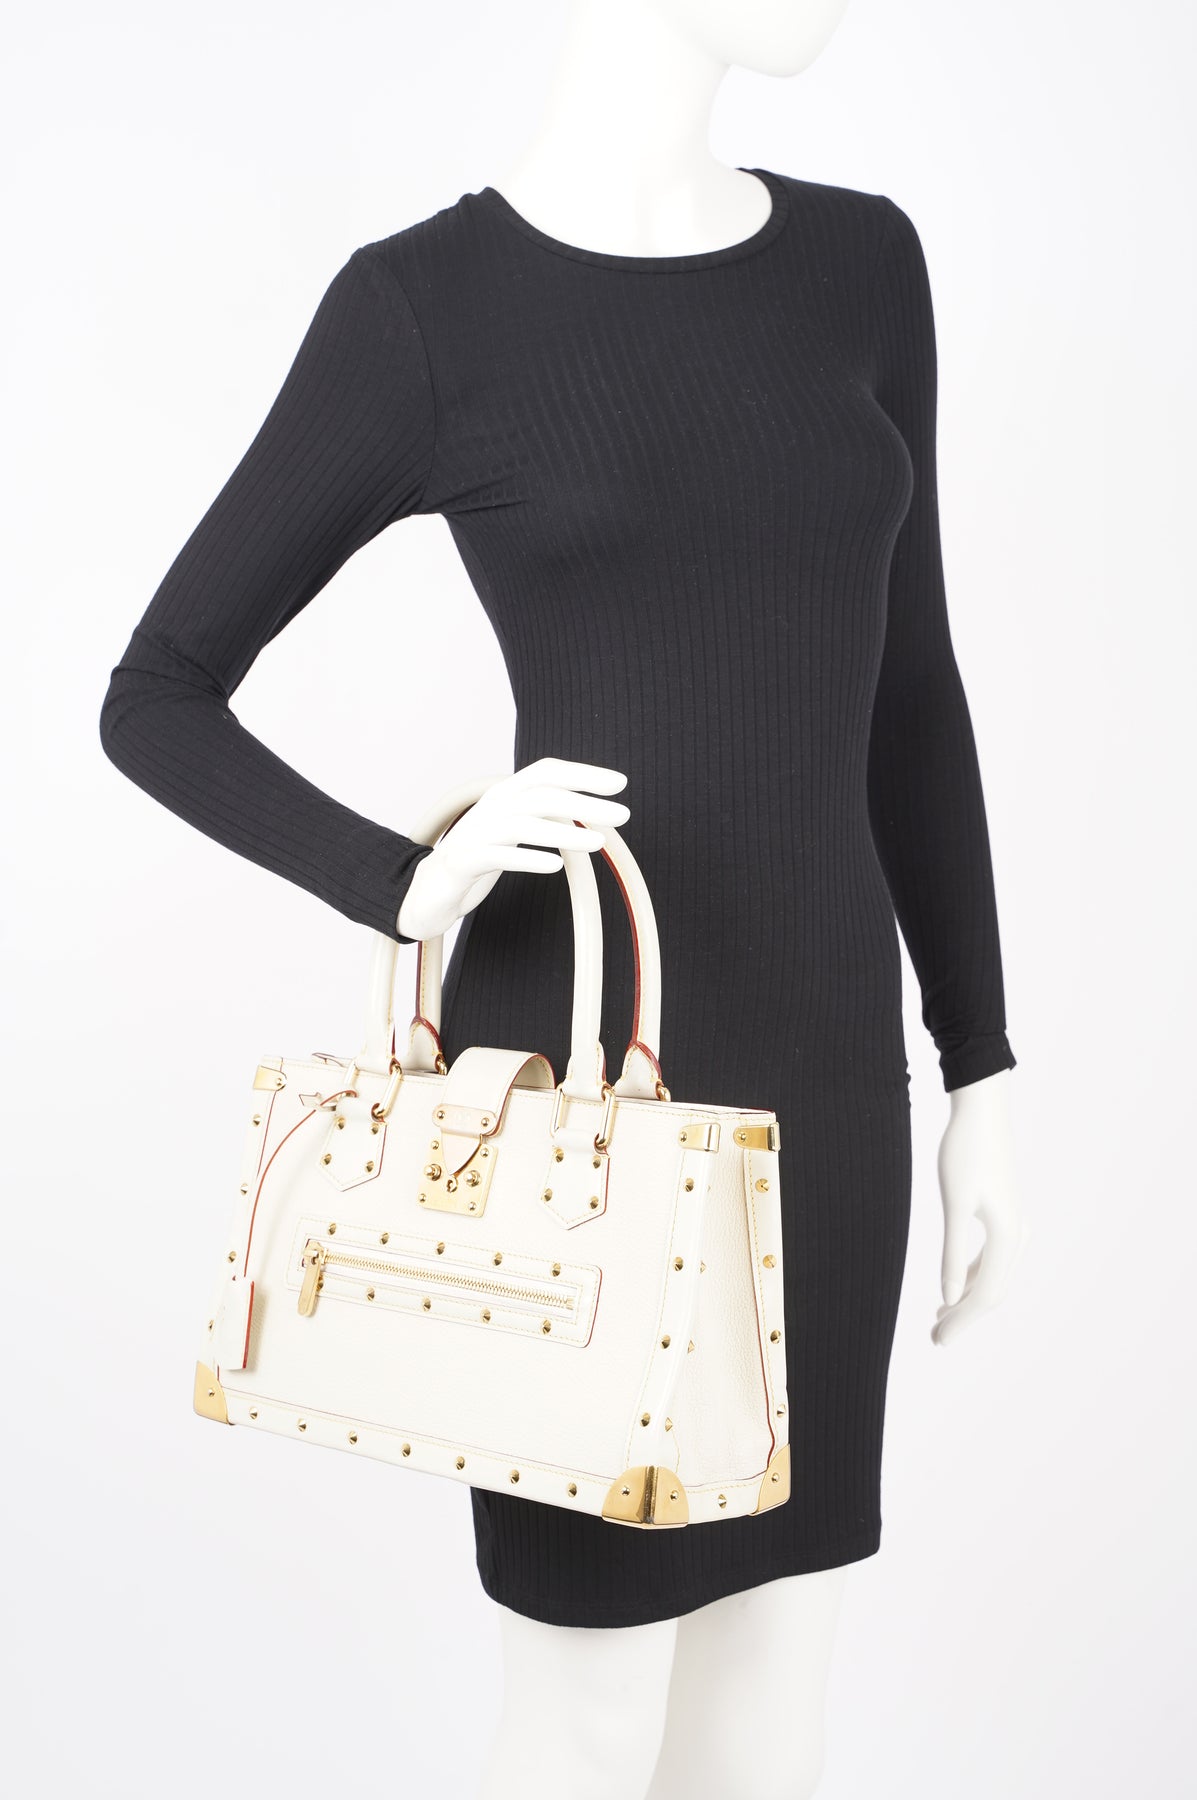 Louis Vuitton White Suhali Leather Le Fabuleux Bag at 1stDibs